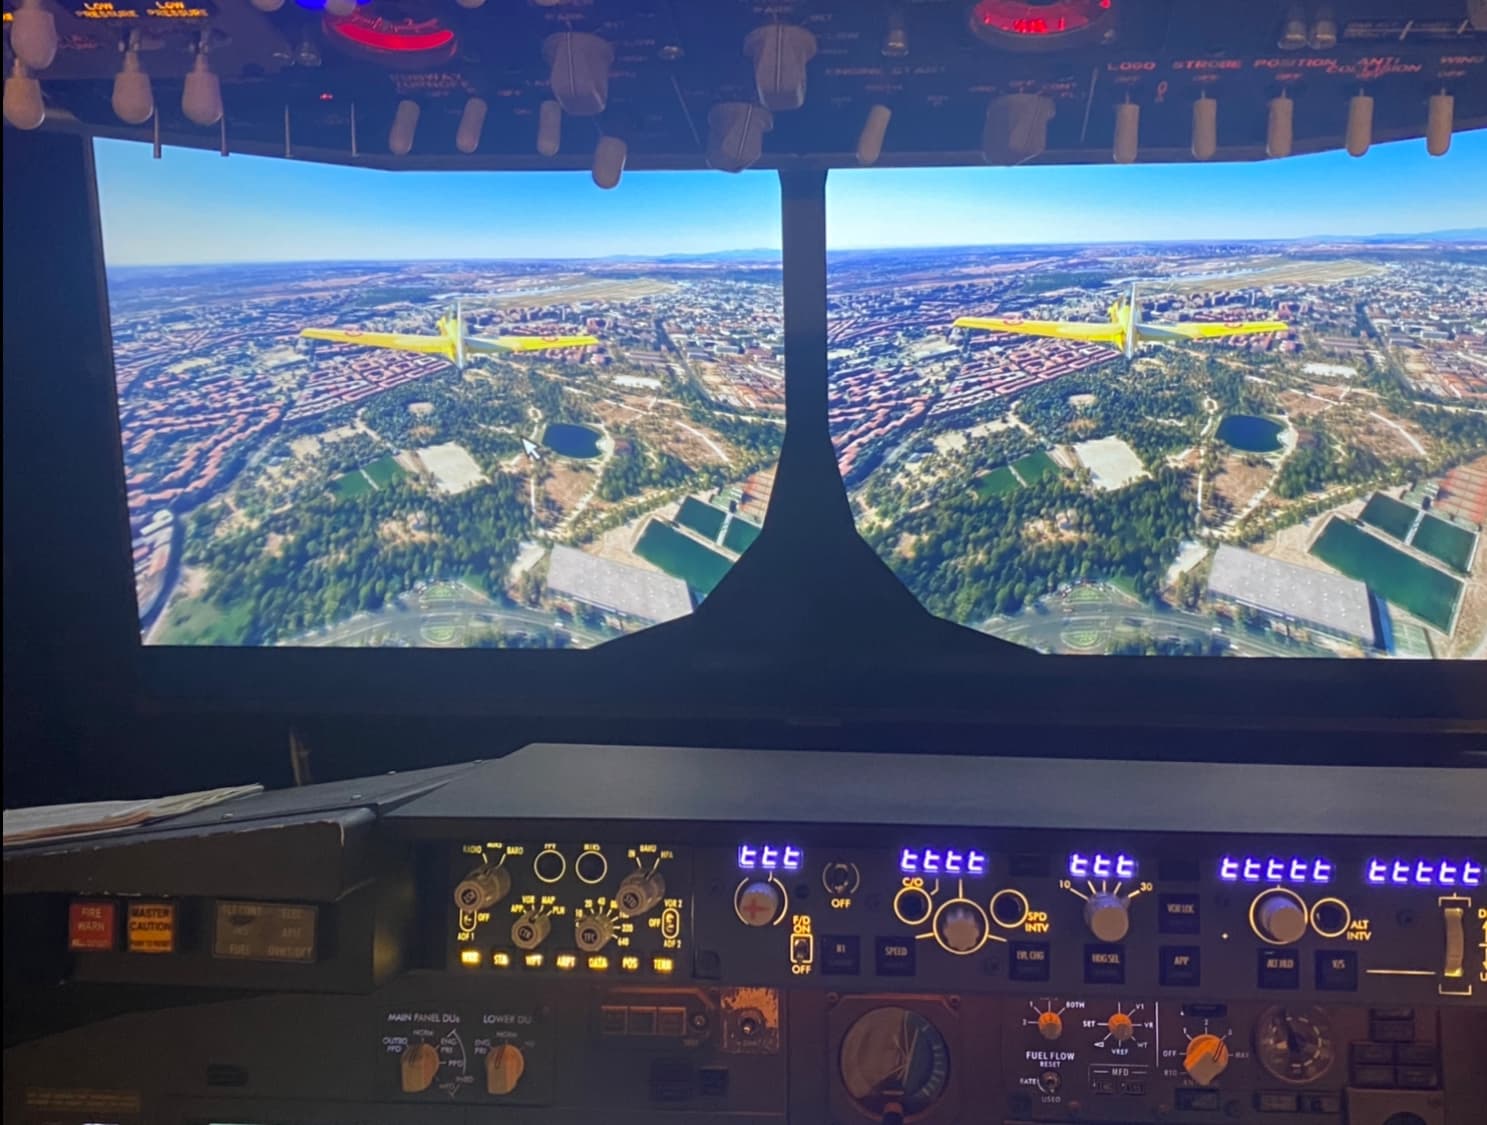 Microsoft Flight Simulator' will support one VR headset this fall